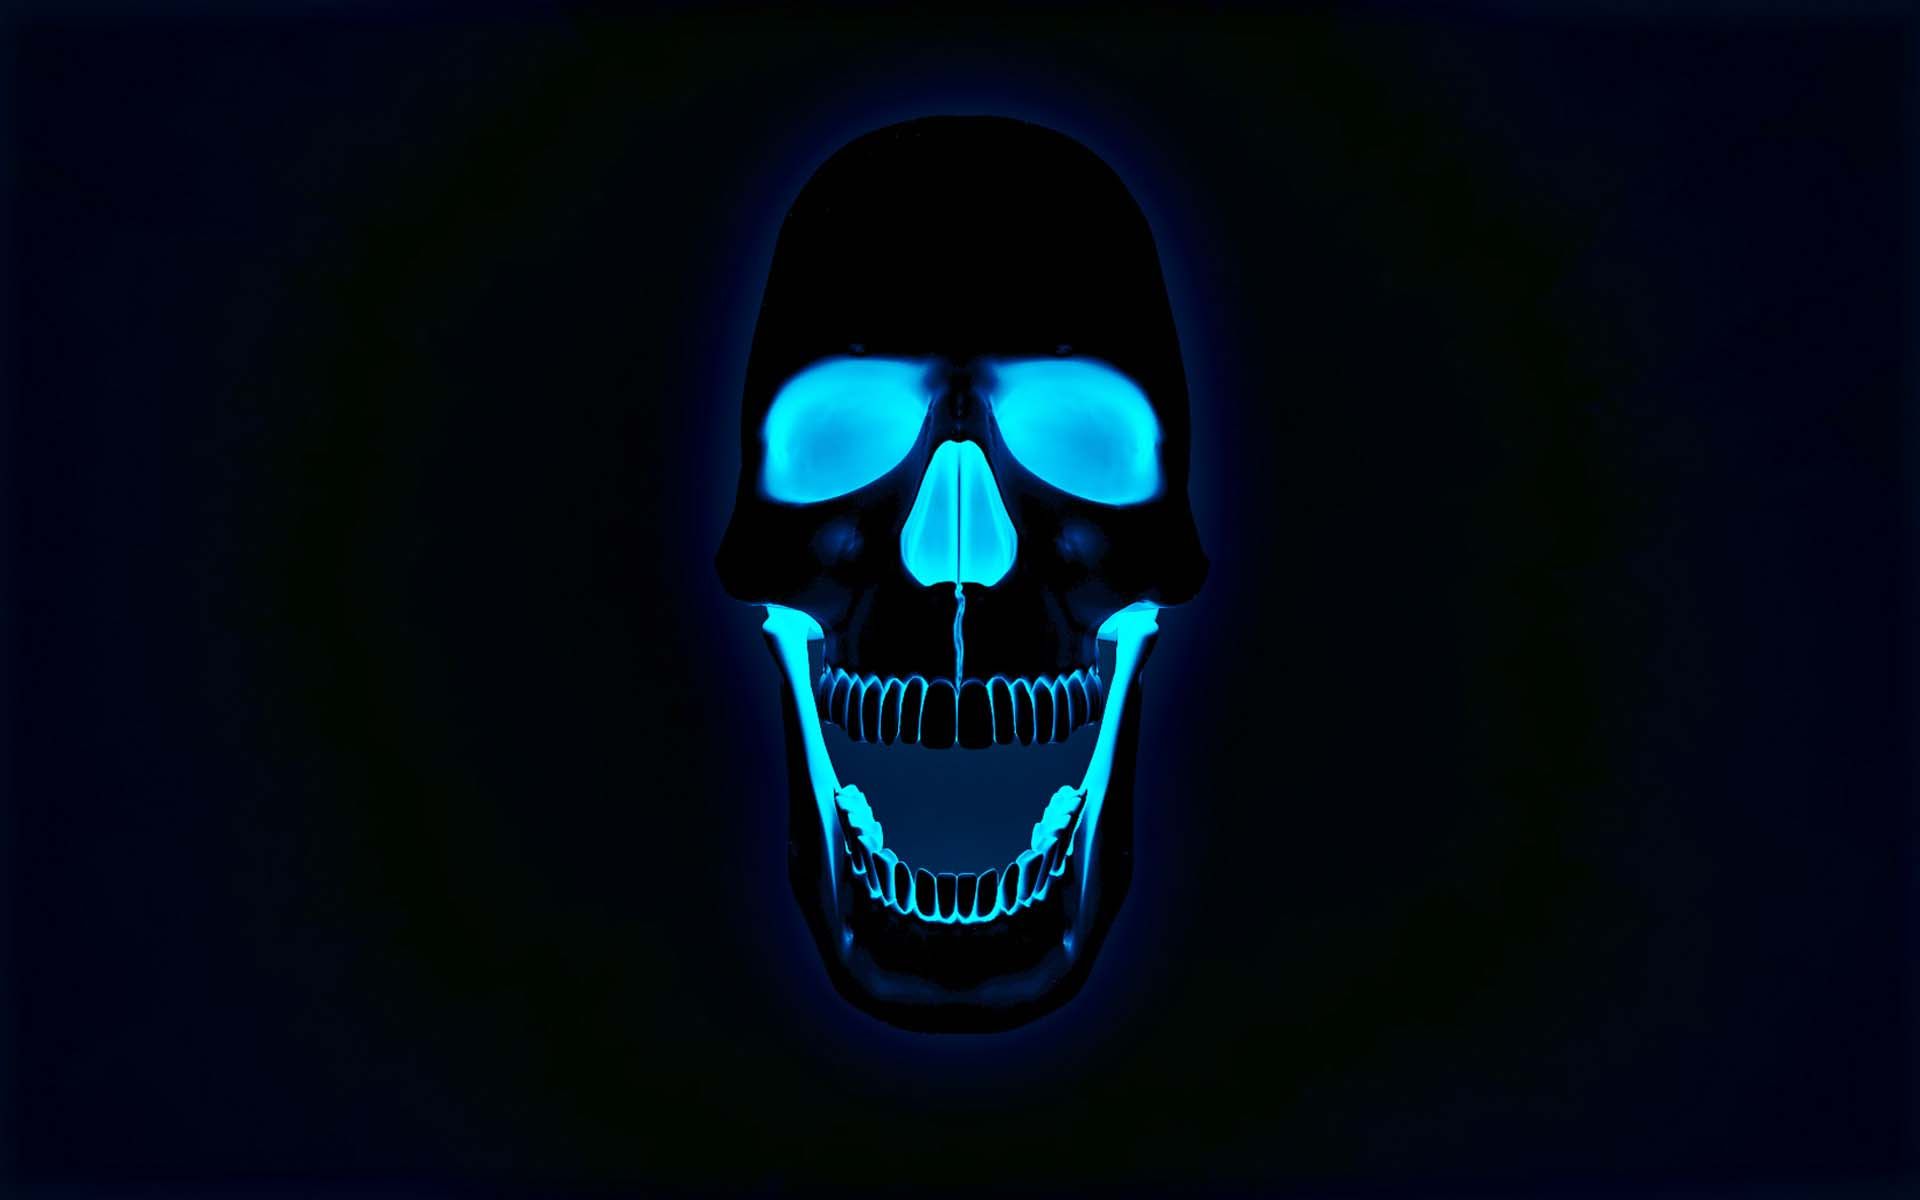 The Neon Skull HD 3d And Abstract Wallpaper For Mobile Desktop